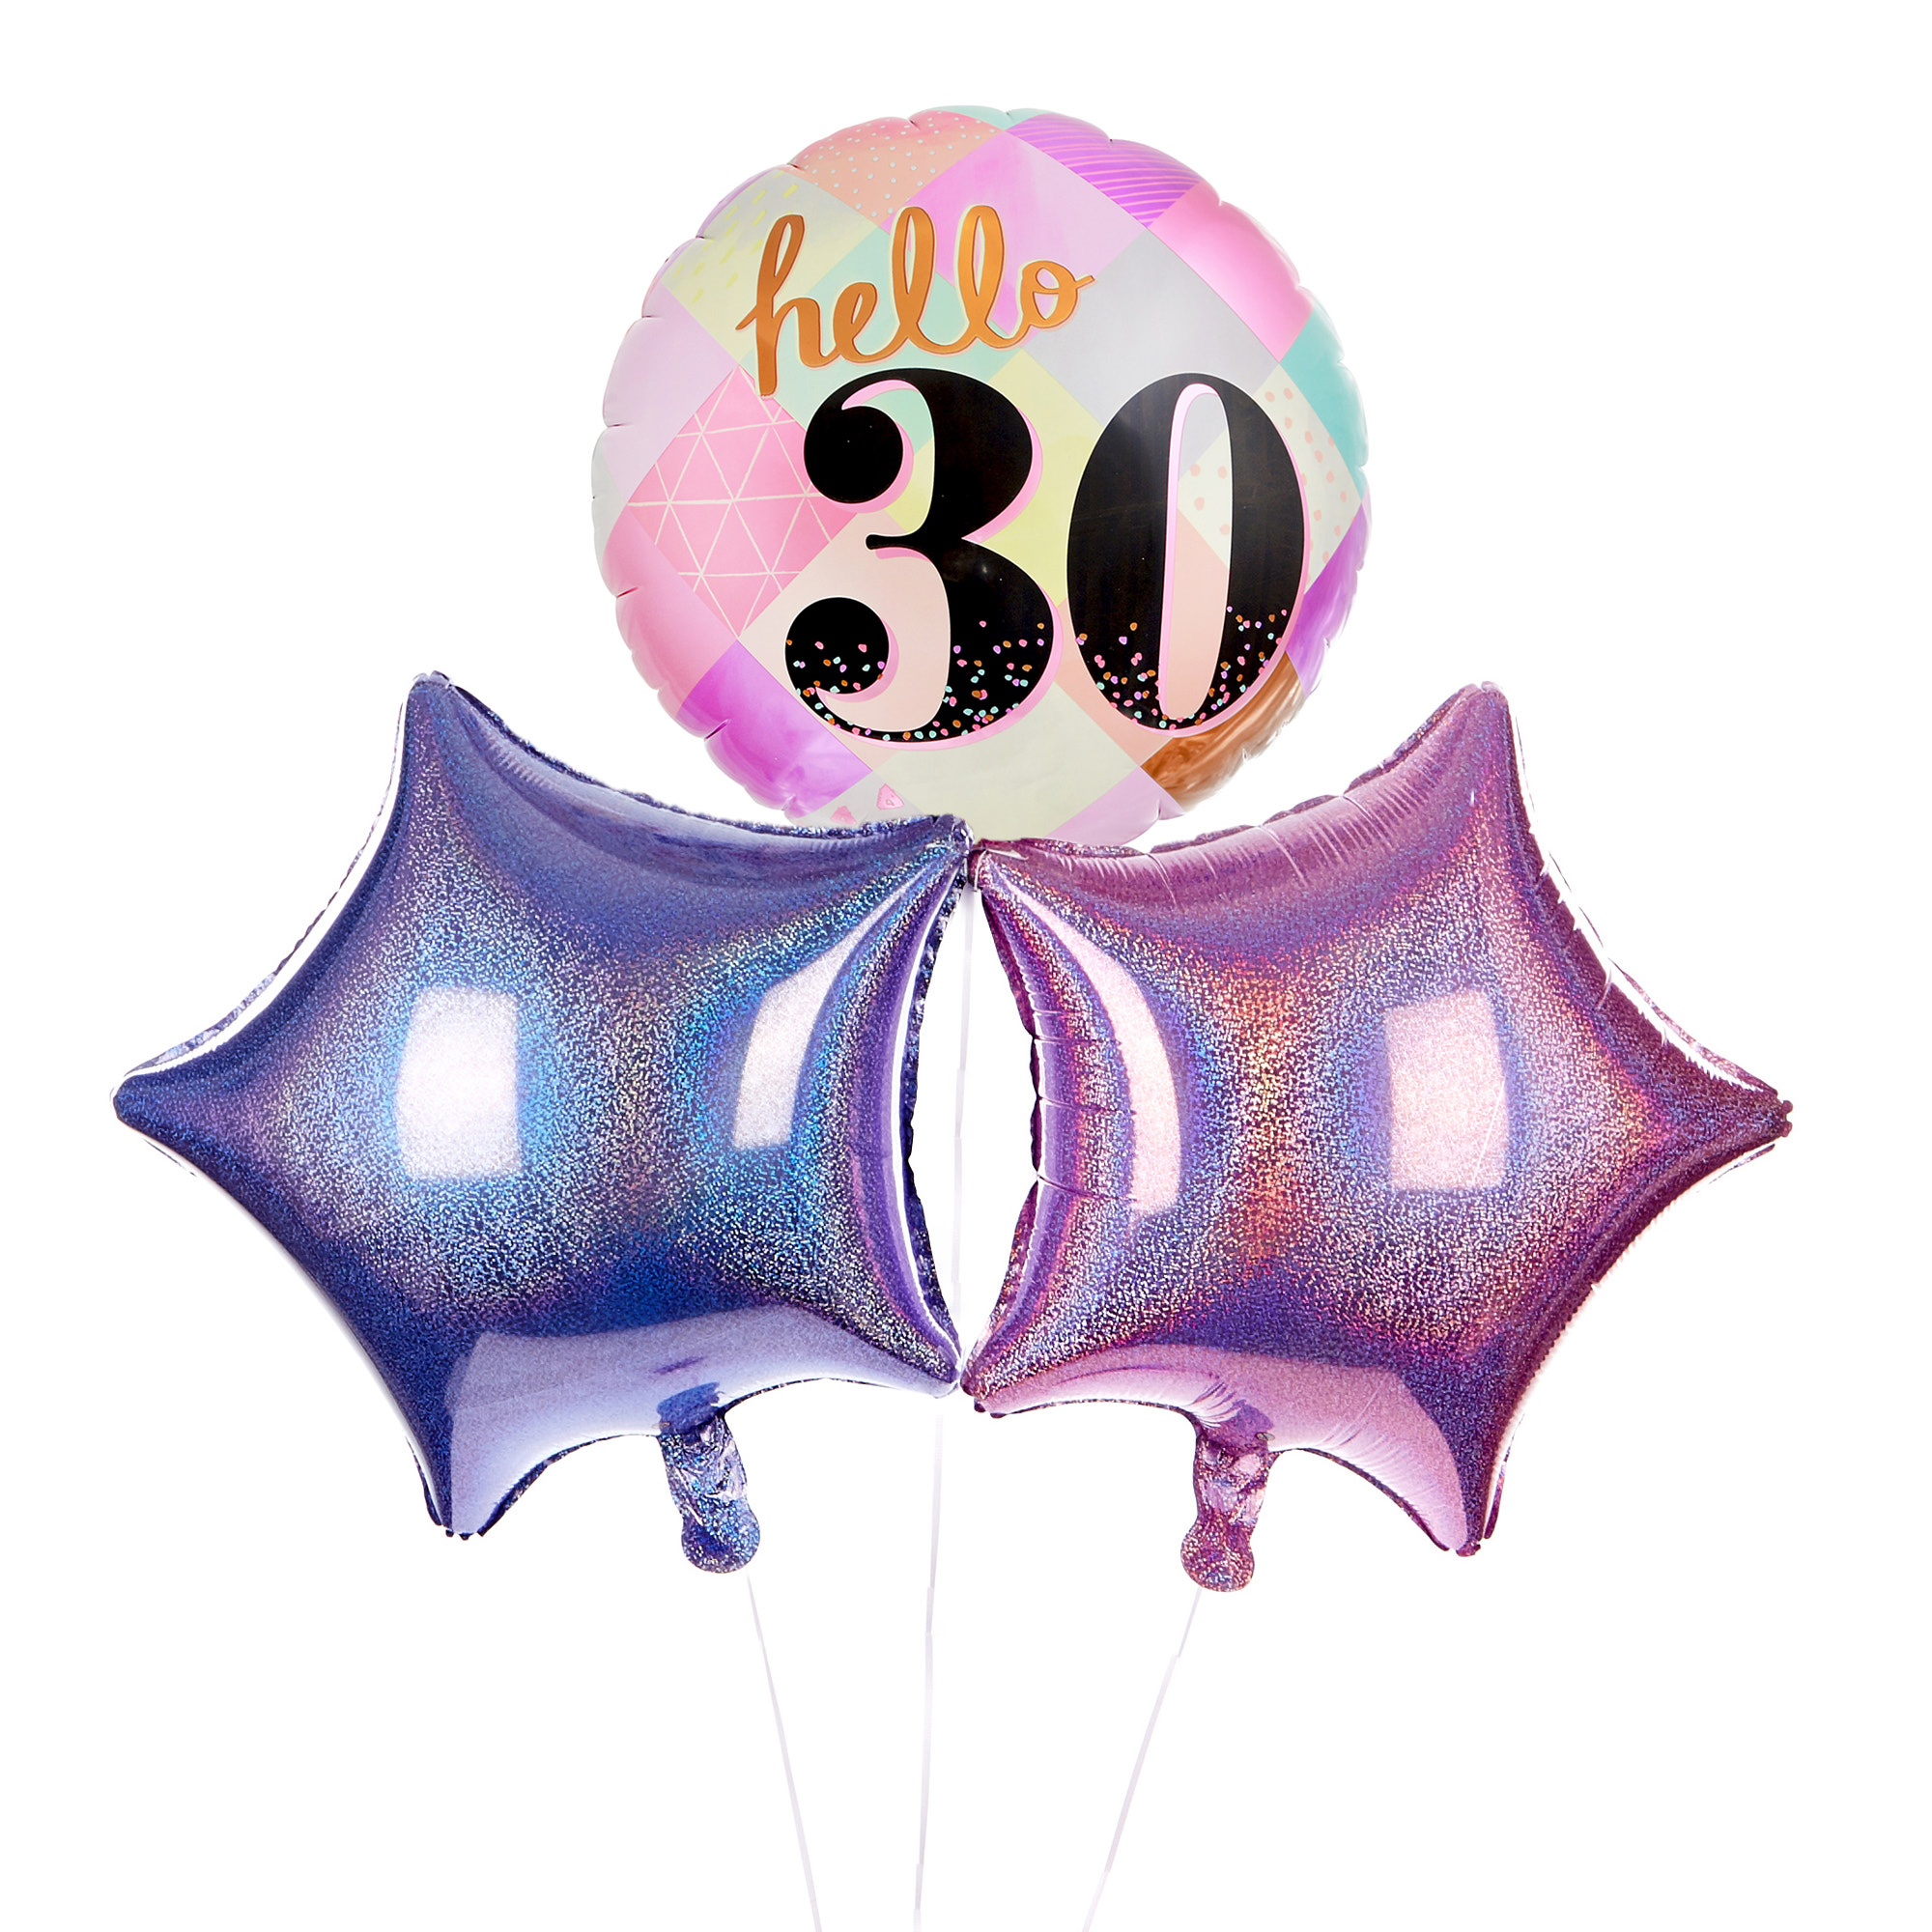 Hello 30th Birthday Balloon Bouquet - DELIVERED INFLATED!